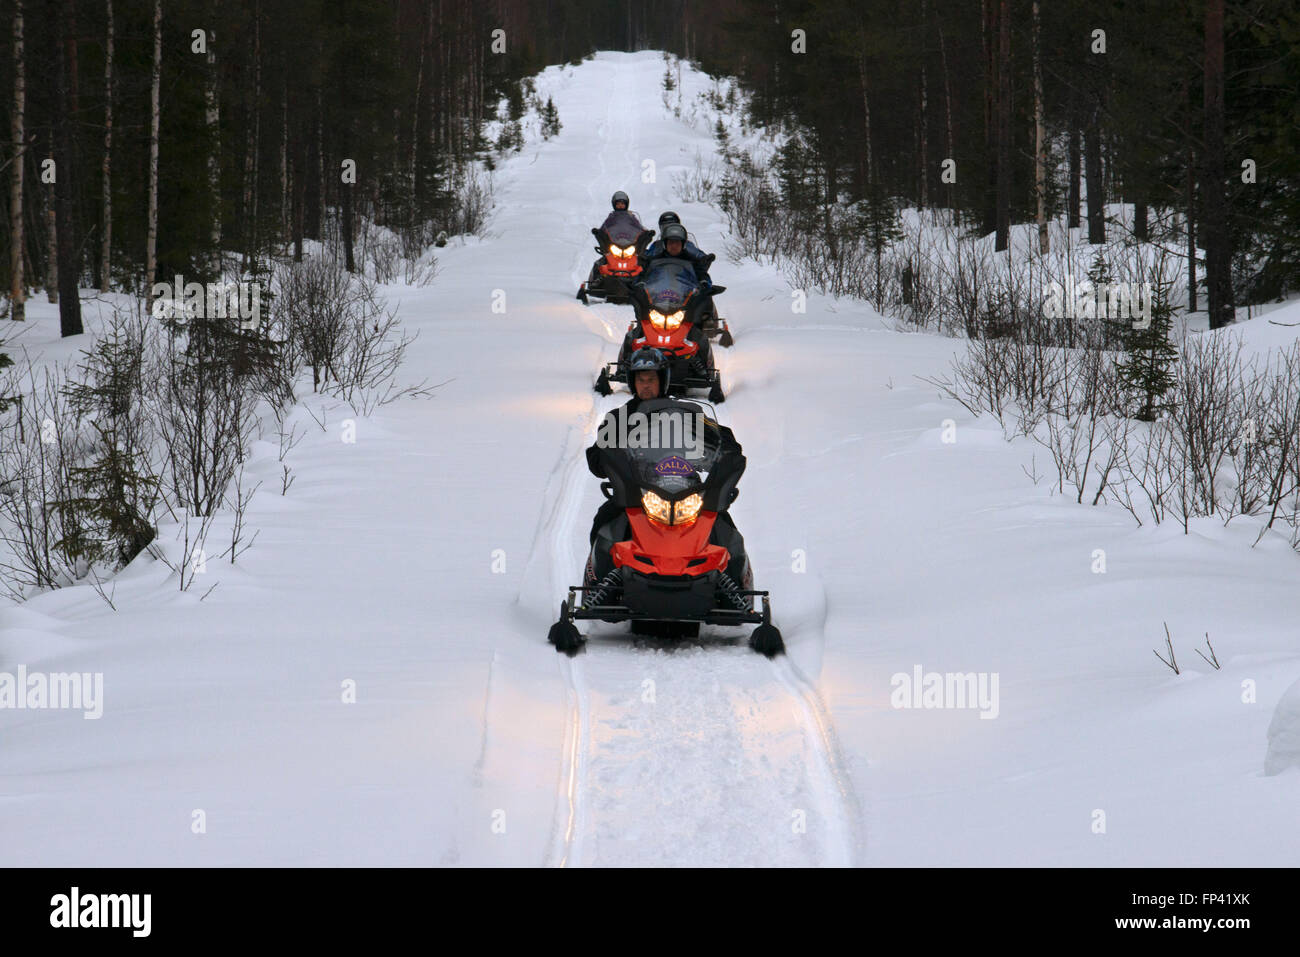 Snowmobiles safaris at Salla, Lapland, Finland. Guided snowmobile safaris are a safe way to explore the wilderness near and far. Stock Photo